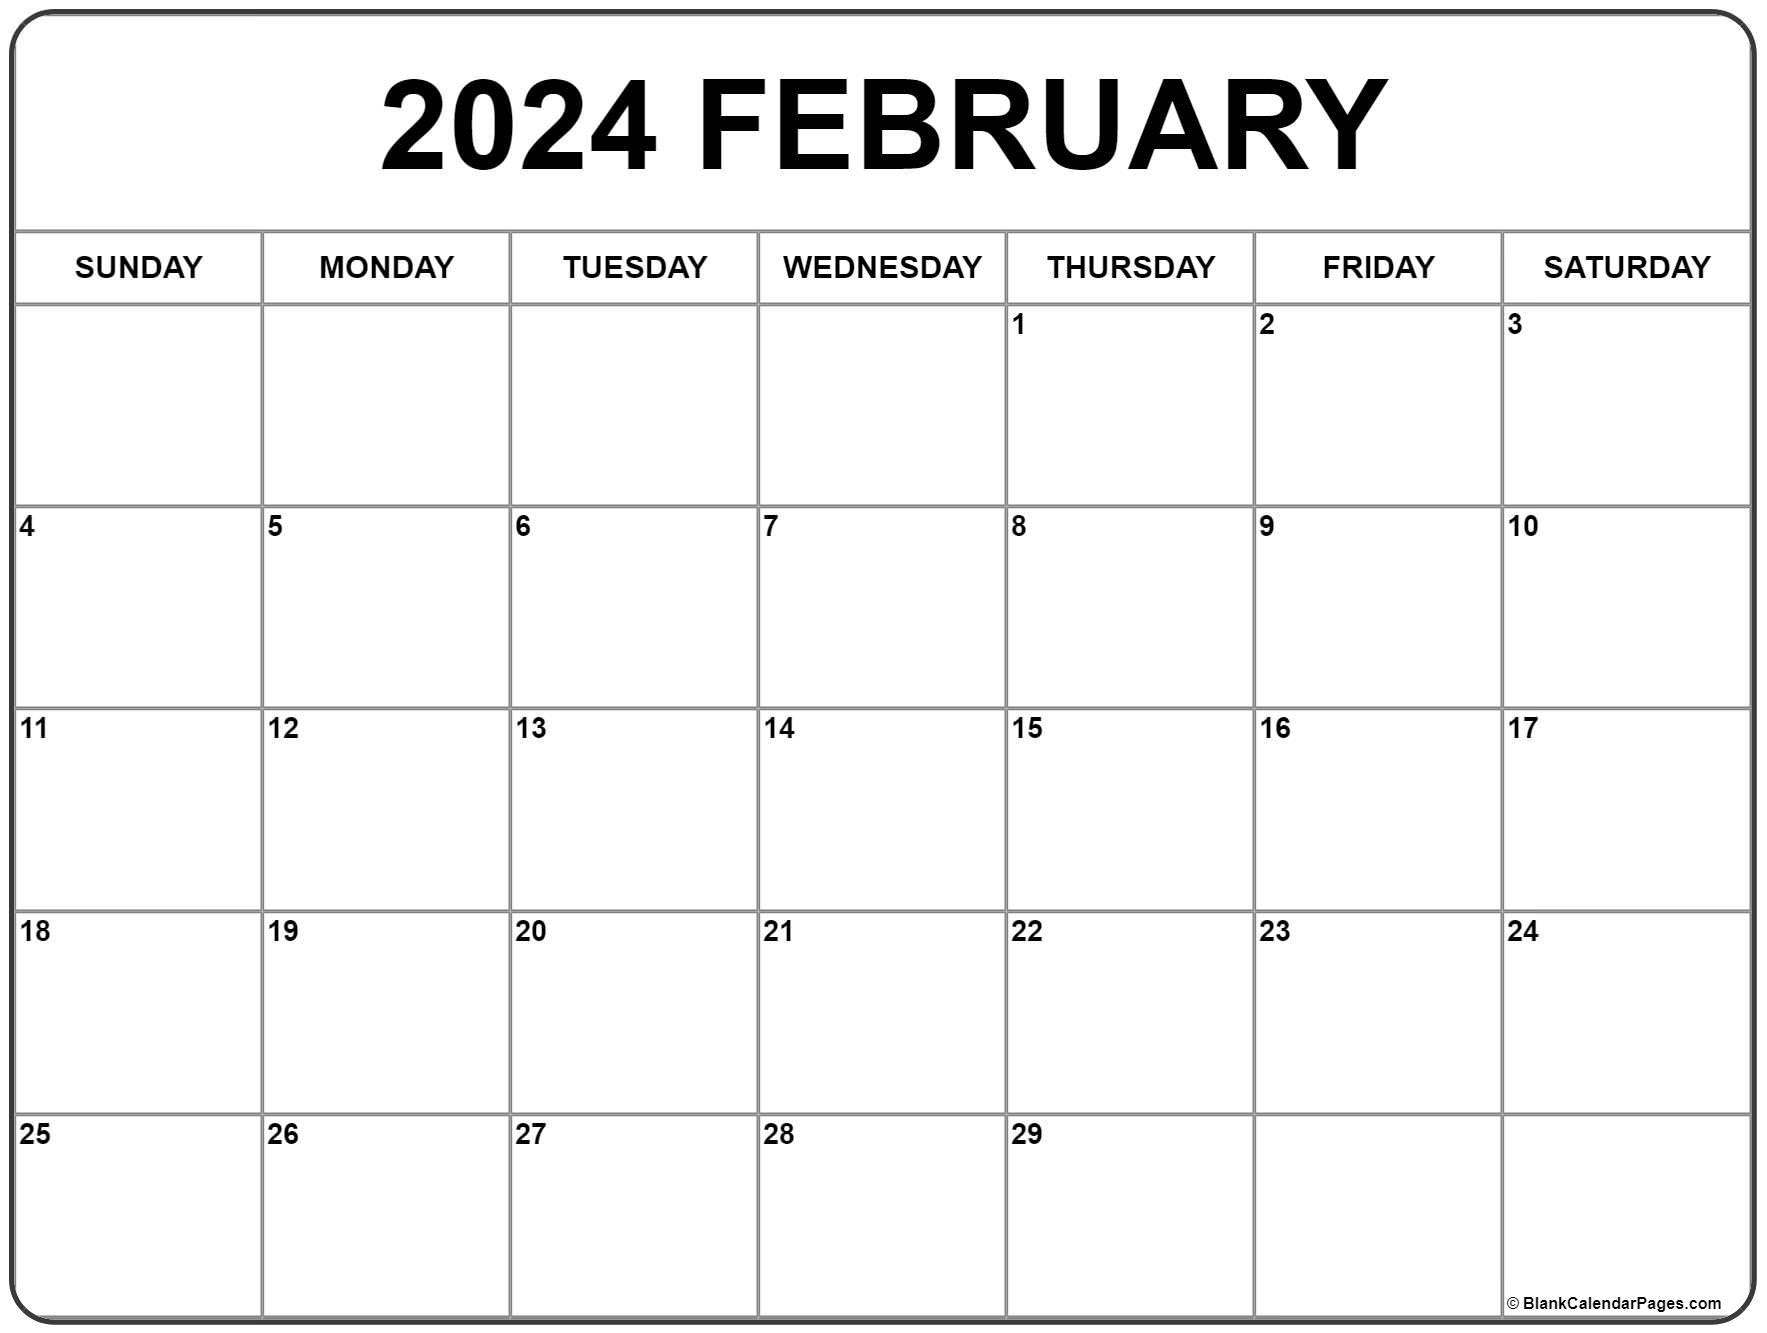 Blank Calendar Pages February 2024 Dacy Michel